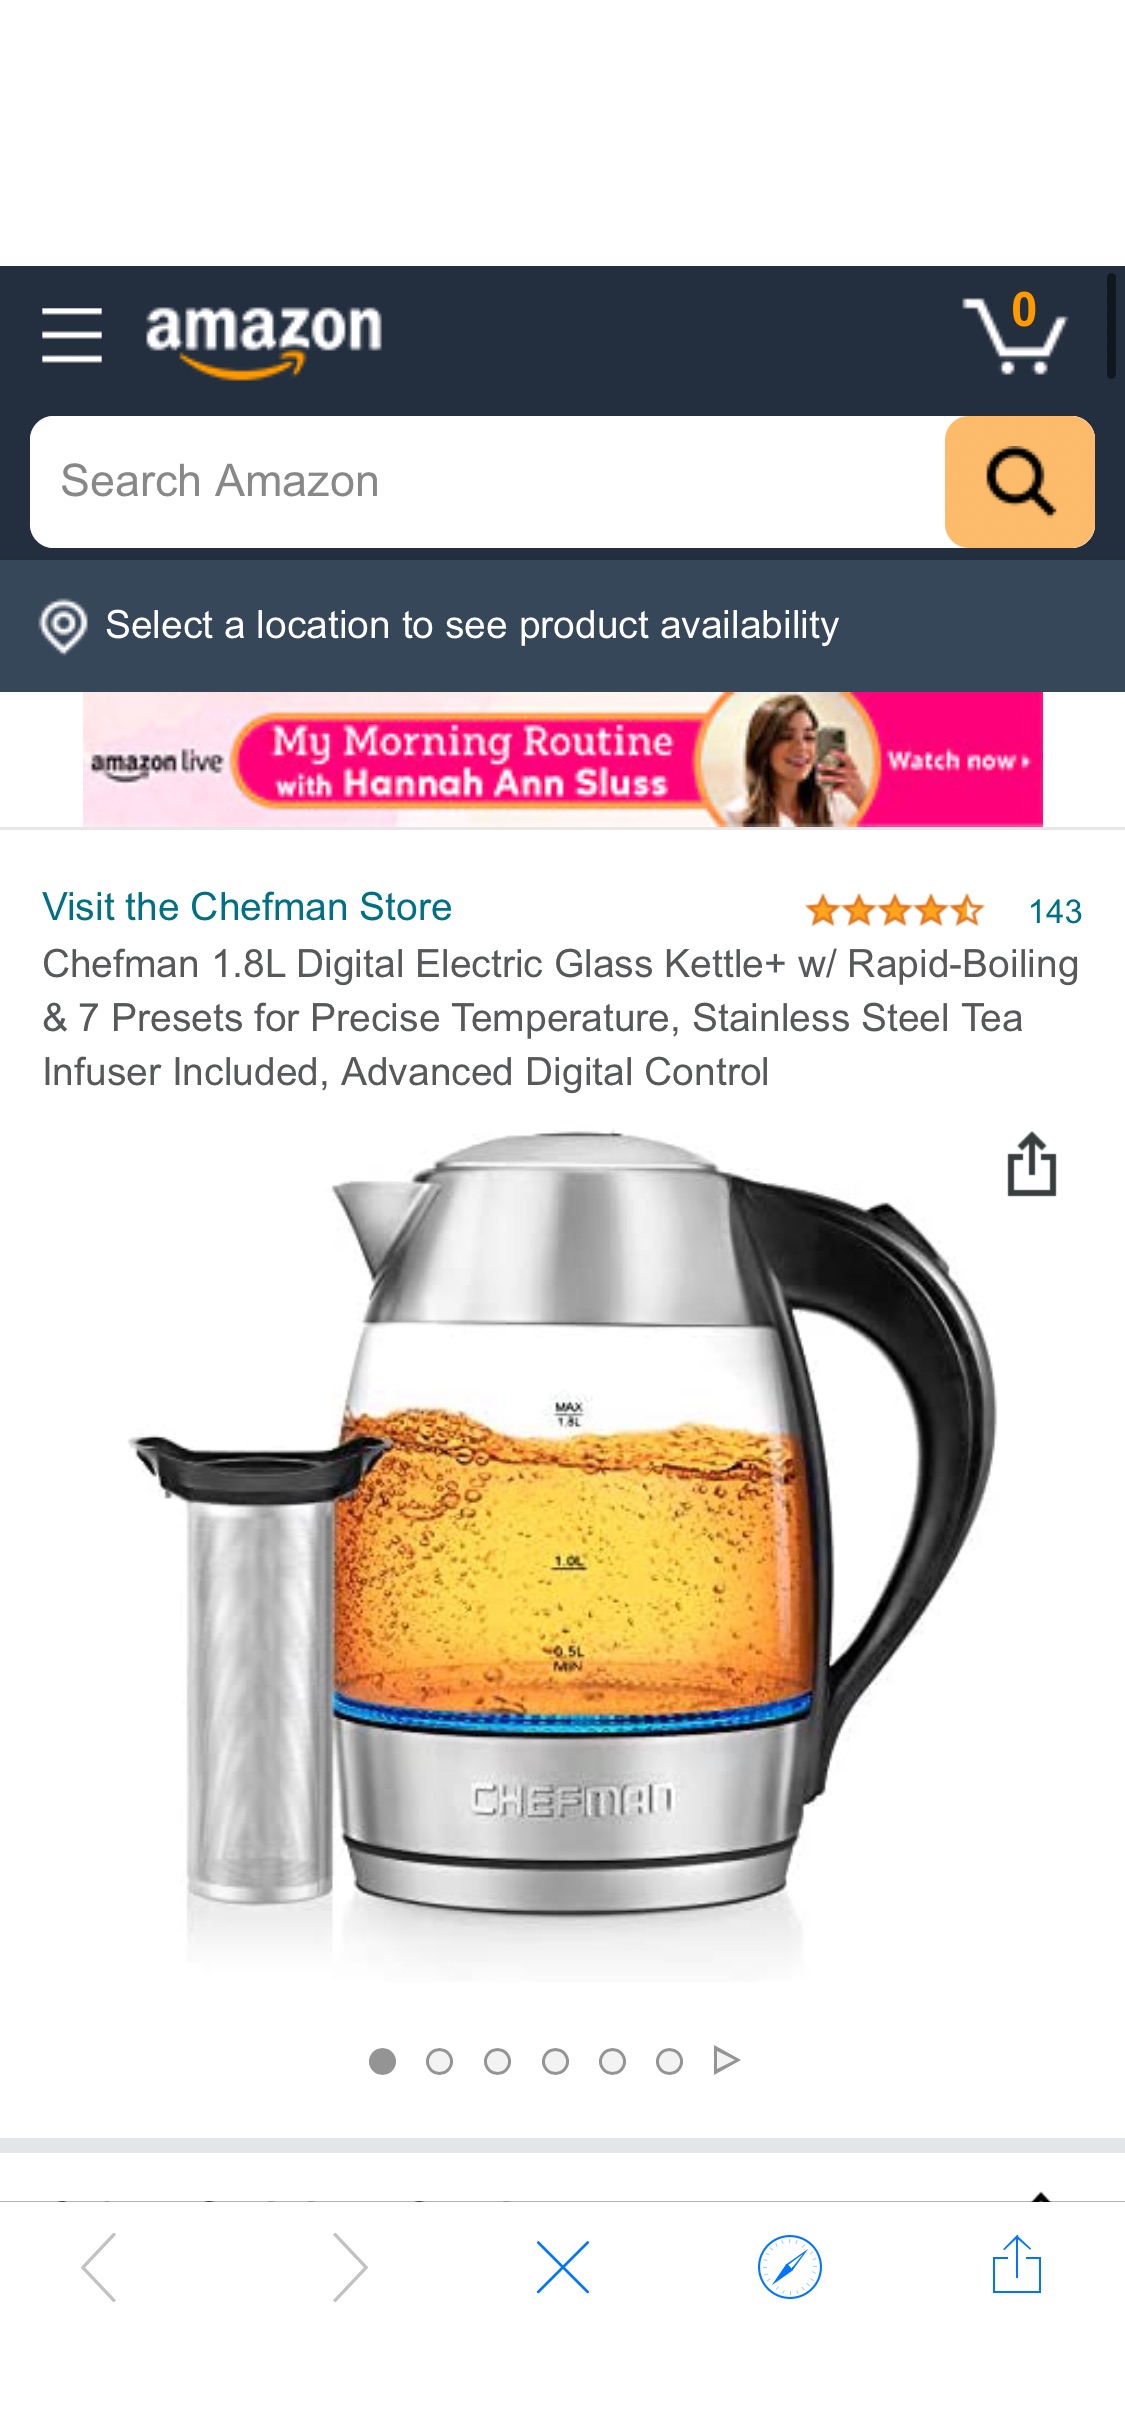 Amazon.com: Chefman 茶壶1.8L Digital Electric Glass Kettle+ w/ Rapid-Boiling & 7 Presets for Precise Temperature, Stainless Steel Tea Infuser Included, Advanced Digital Control: Kitchen & Dining